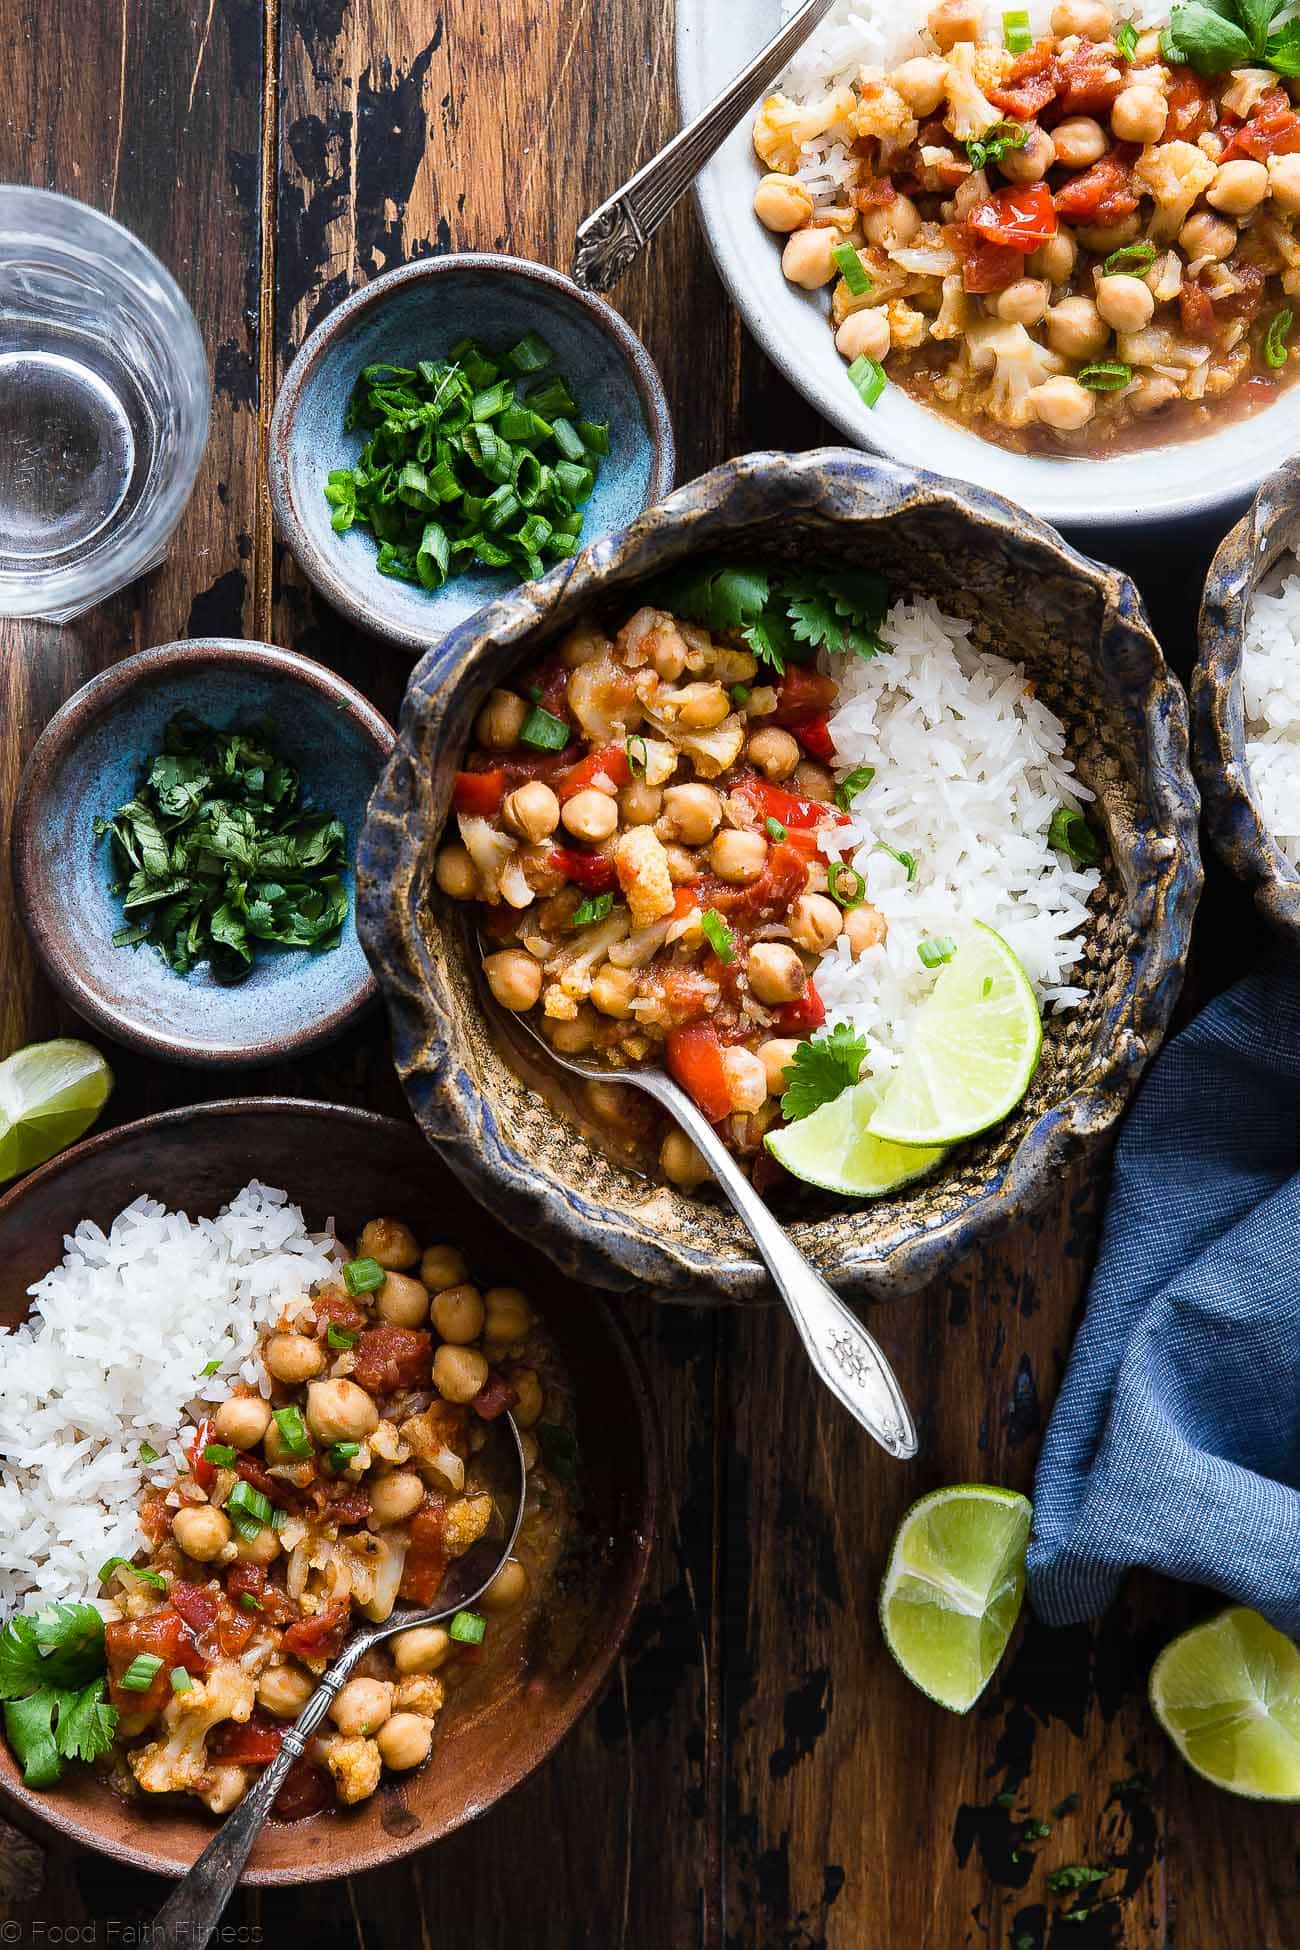 Instant Pot Vegan Chickpea Curry - This easy chickpea curry is made in the Instant Pot and ready in 20 mins! It uses coconut milk and tomatoes to make it thick and so creamy! Makes great leftovers and is great for meal prep! | Foodfaithfitness.com | @FoodFaithFit